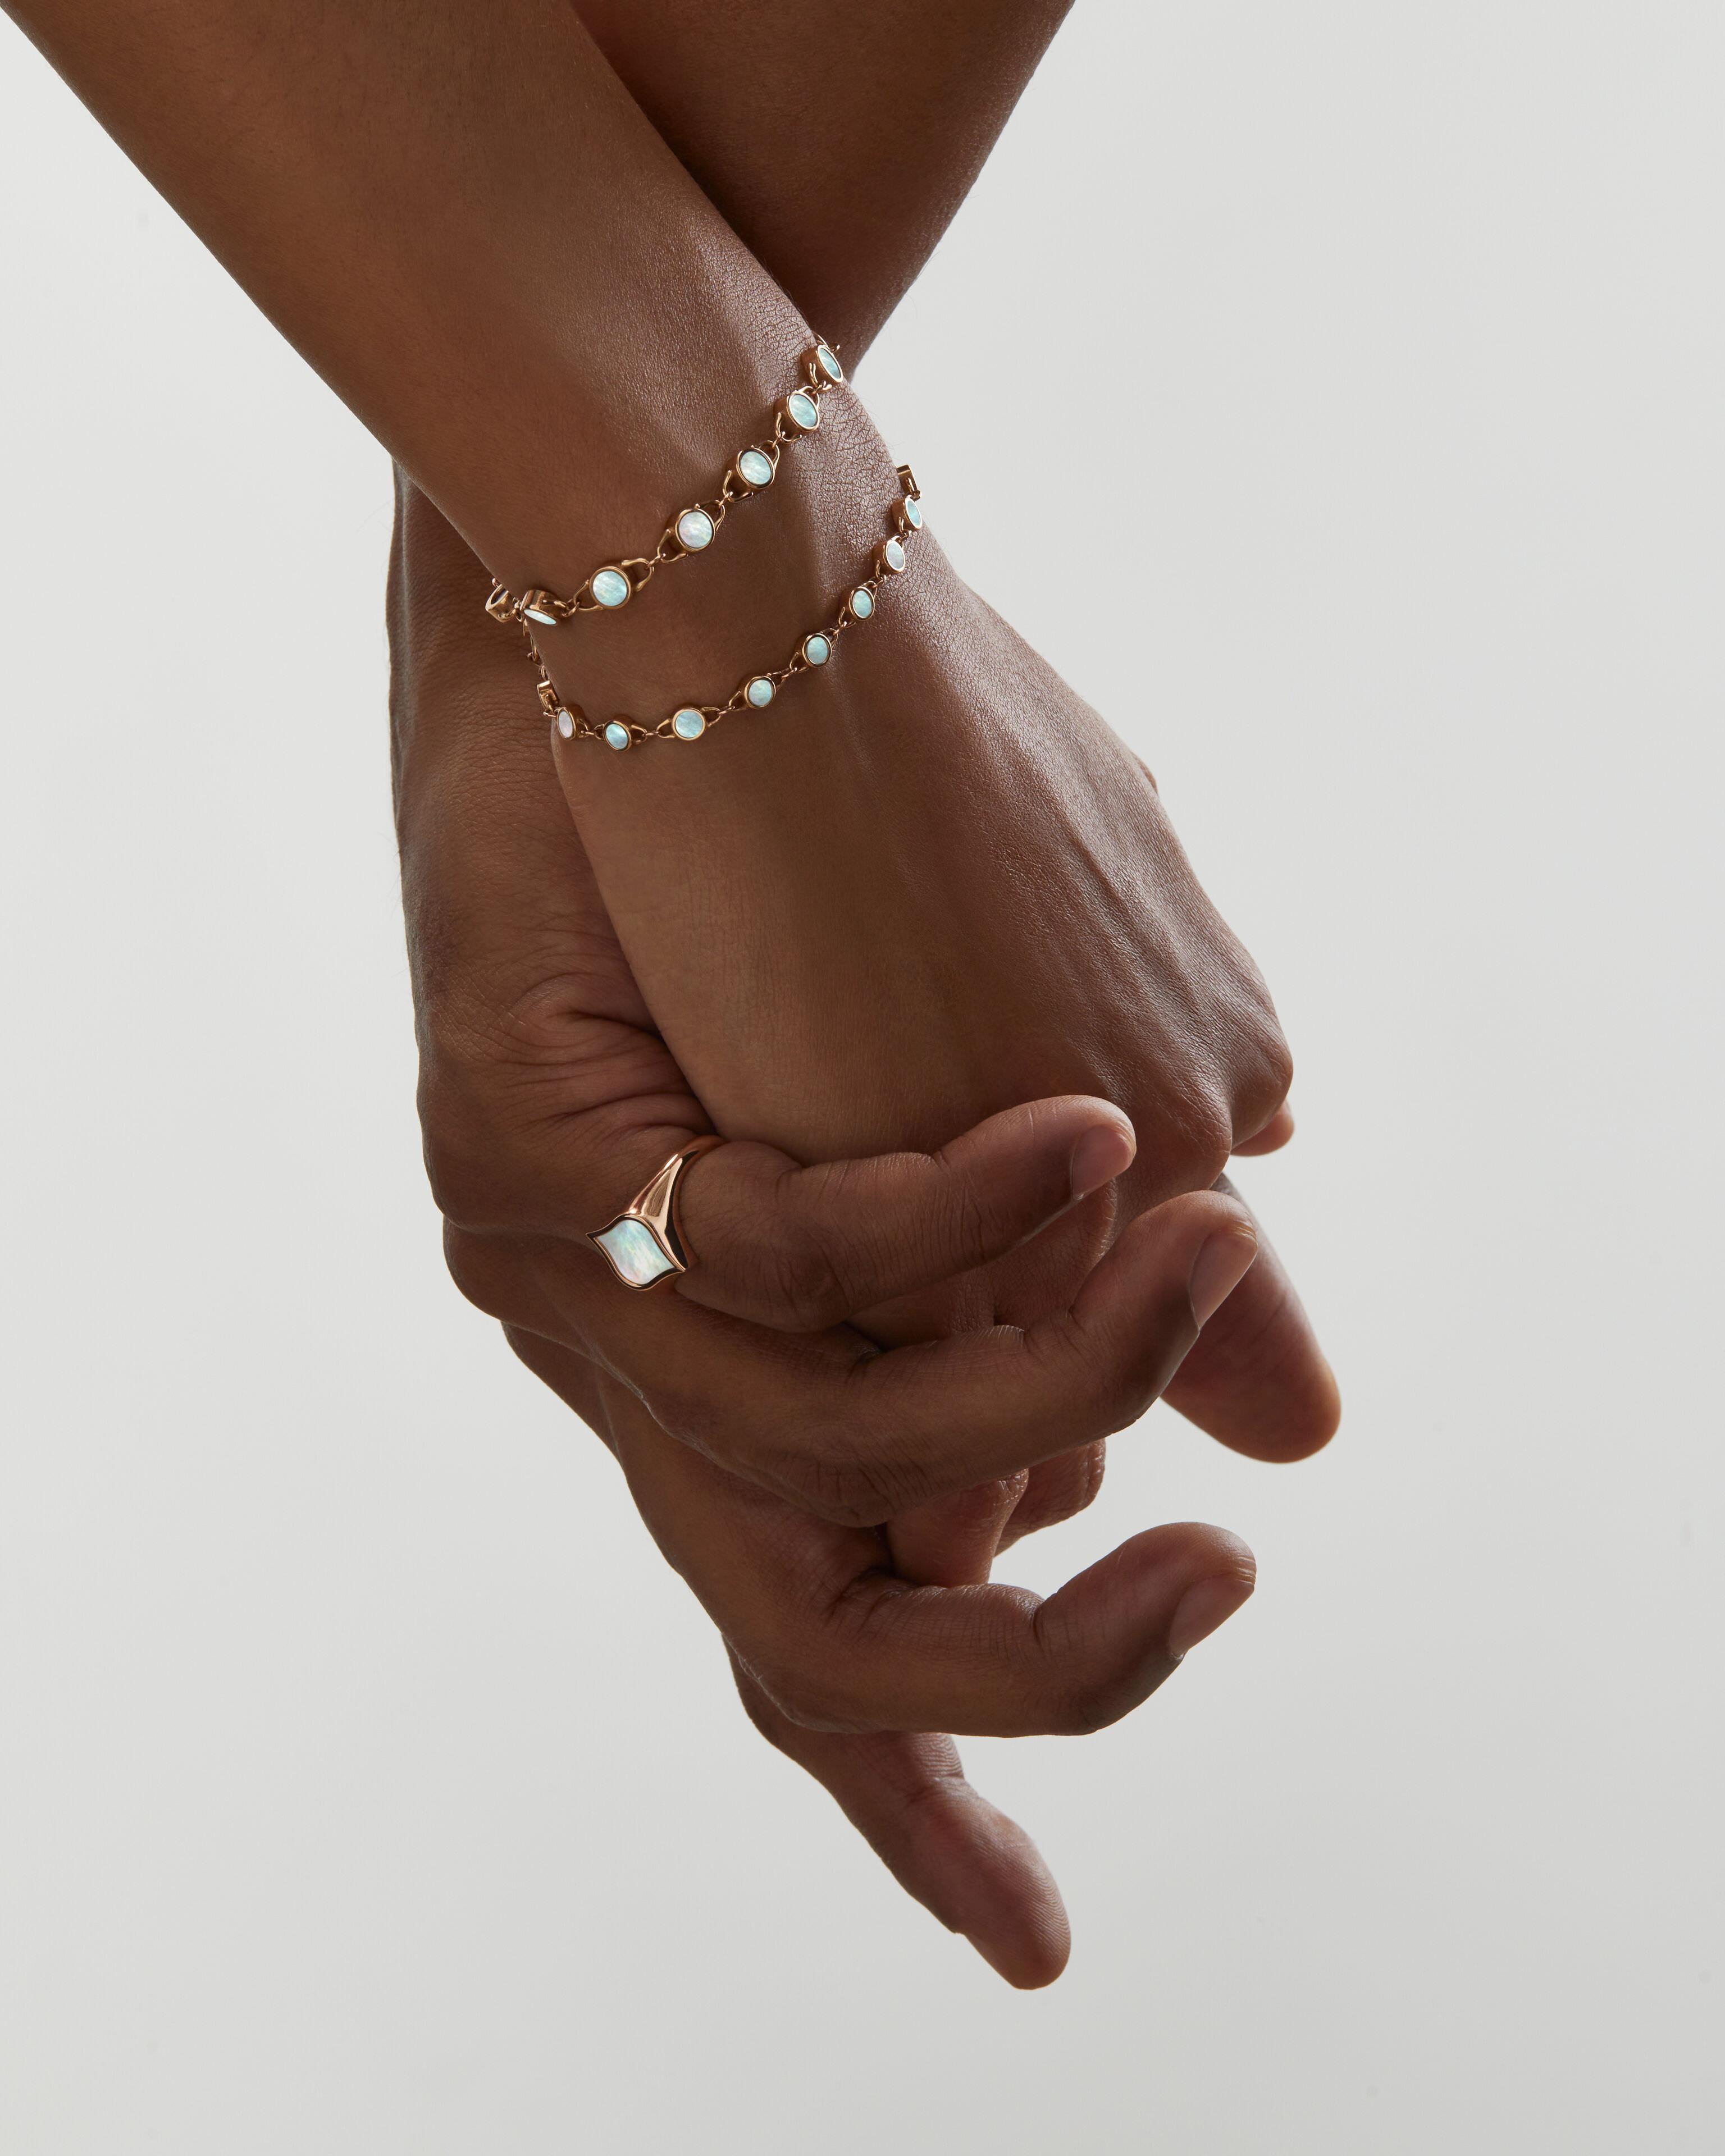 A new tennis bracelet: a sculptural yet delicate chain bracelet with carved mother-of-pearl disks and open links in 18k rose gold. This innovative system connects the structure of padlocks and the fluidity of water drops. The clasp is distinguished